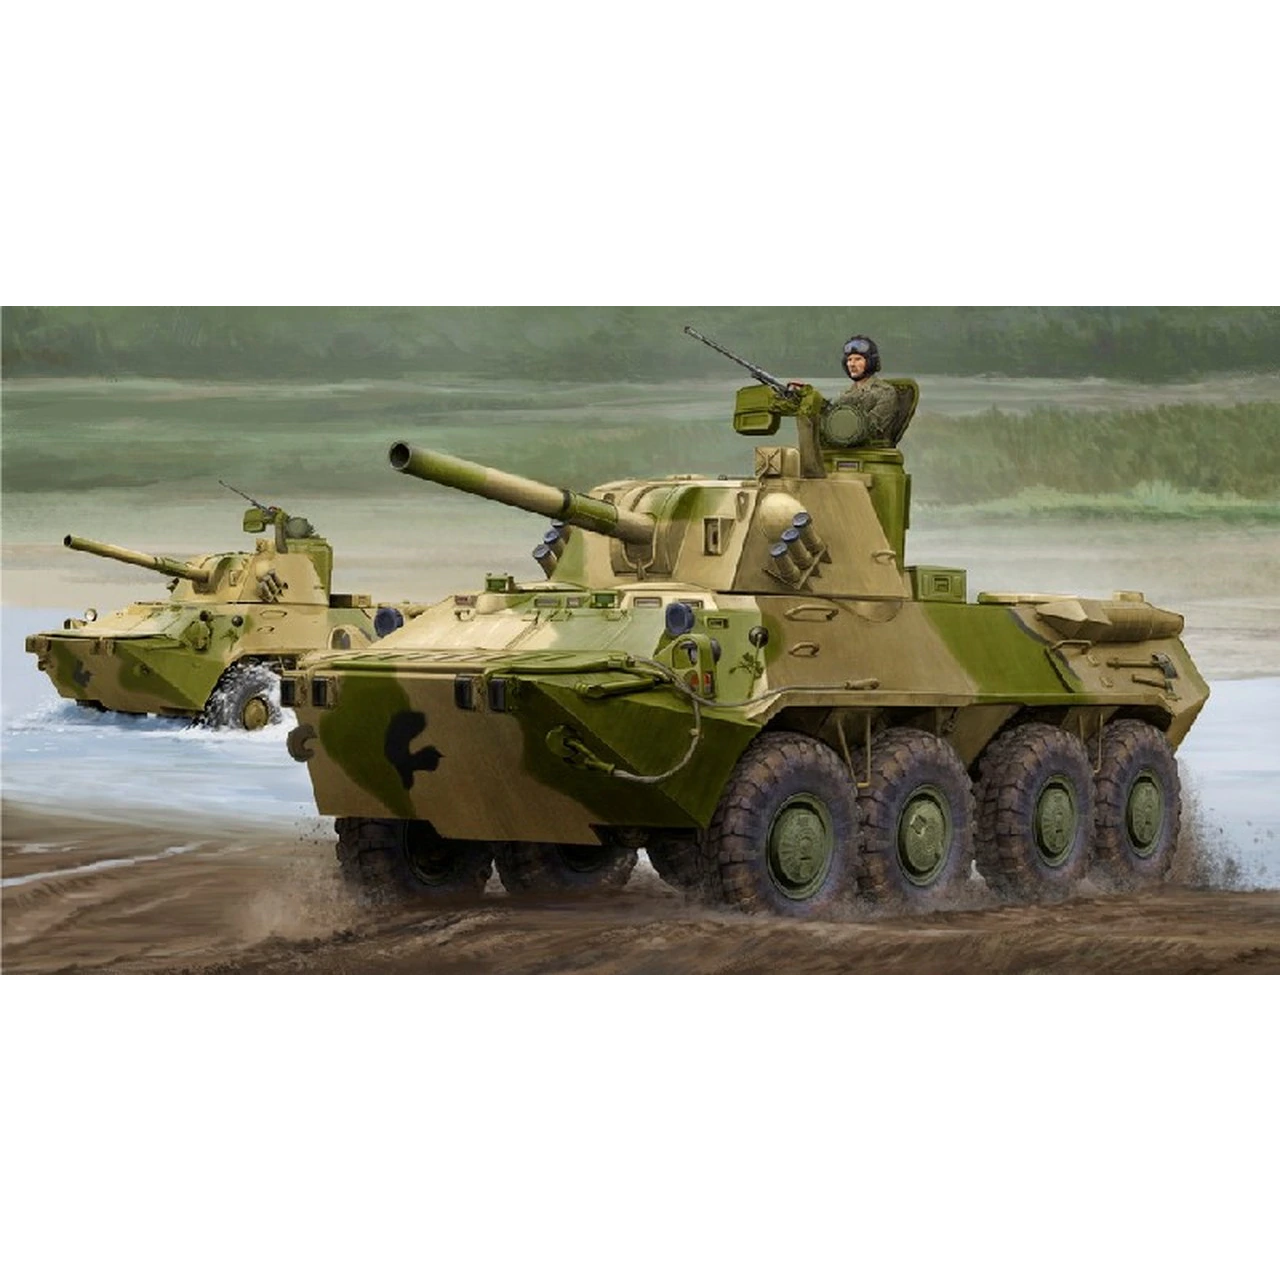 Russian 2S23 Self-Propelled Howitzer 1/35 by Trumpeter